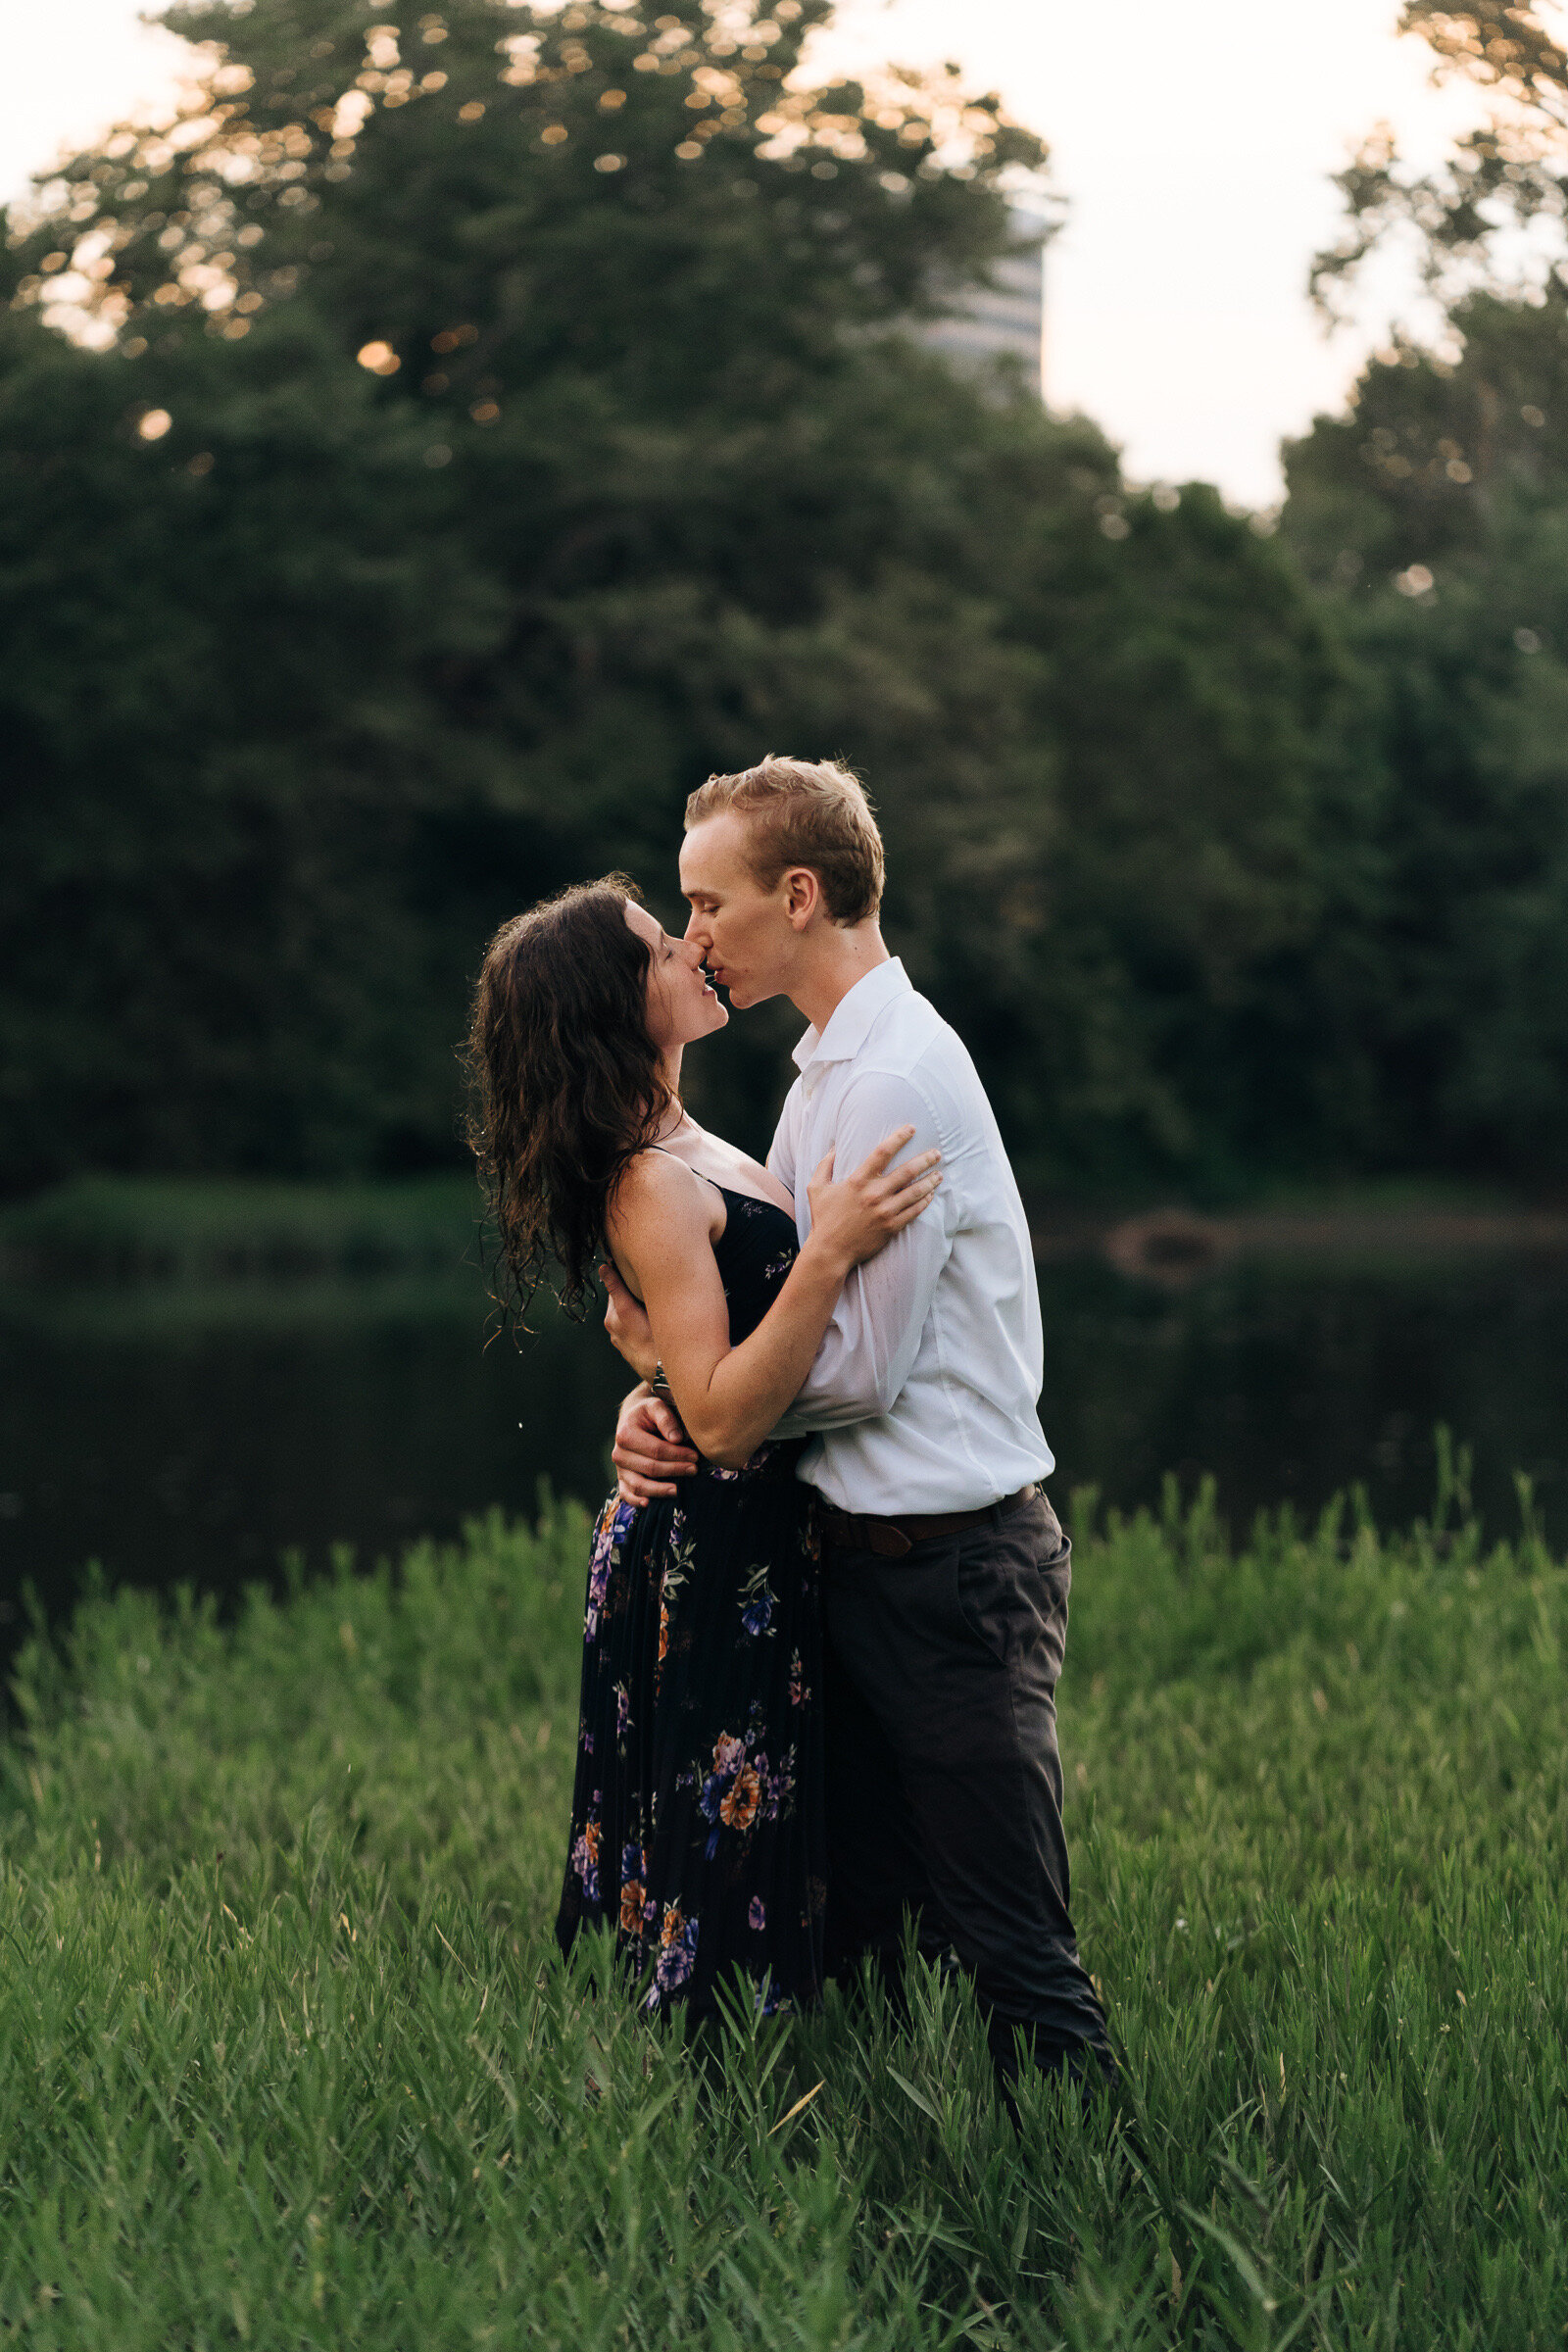 grant-rachel-downtown-lynchburg-virginia-summer-lifestyle-in-the-river-romantic-flirty-and-fun-engagement-session-by-jonathan-hannah-photography-25.jpg